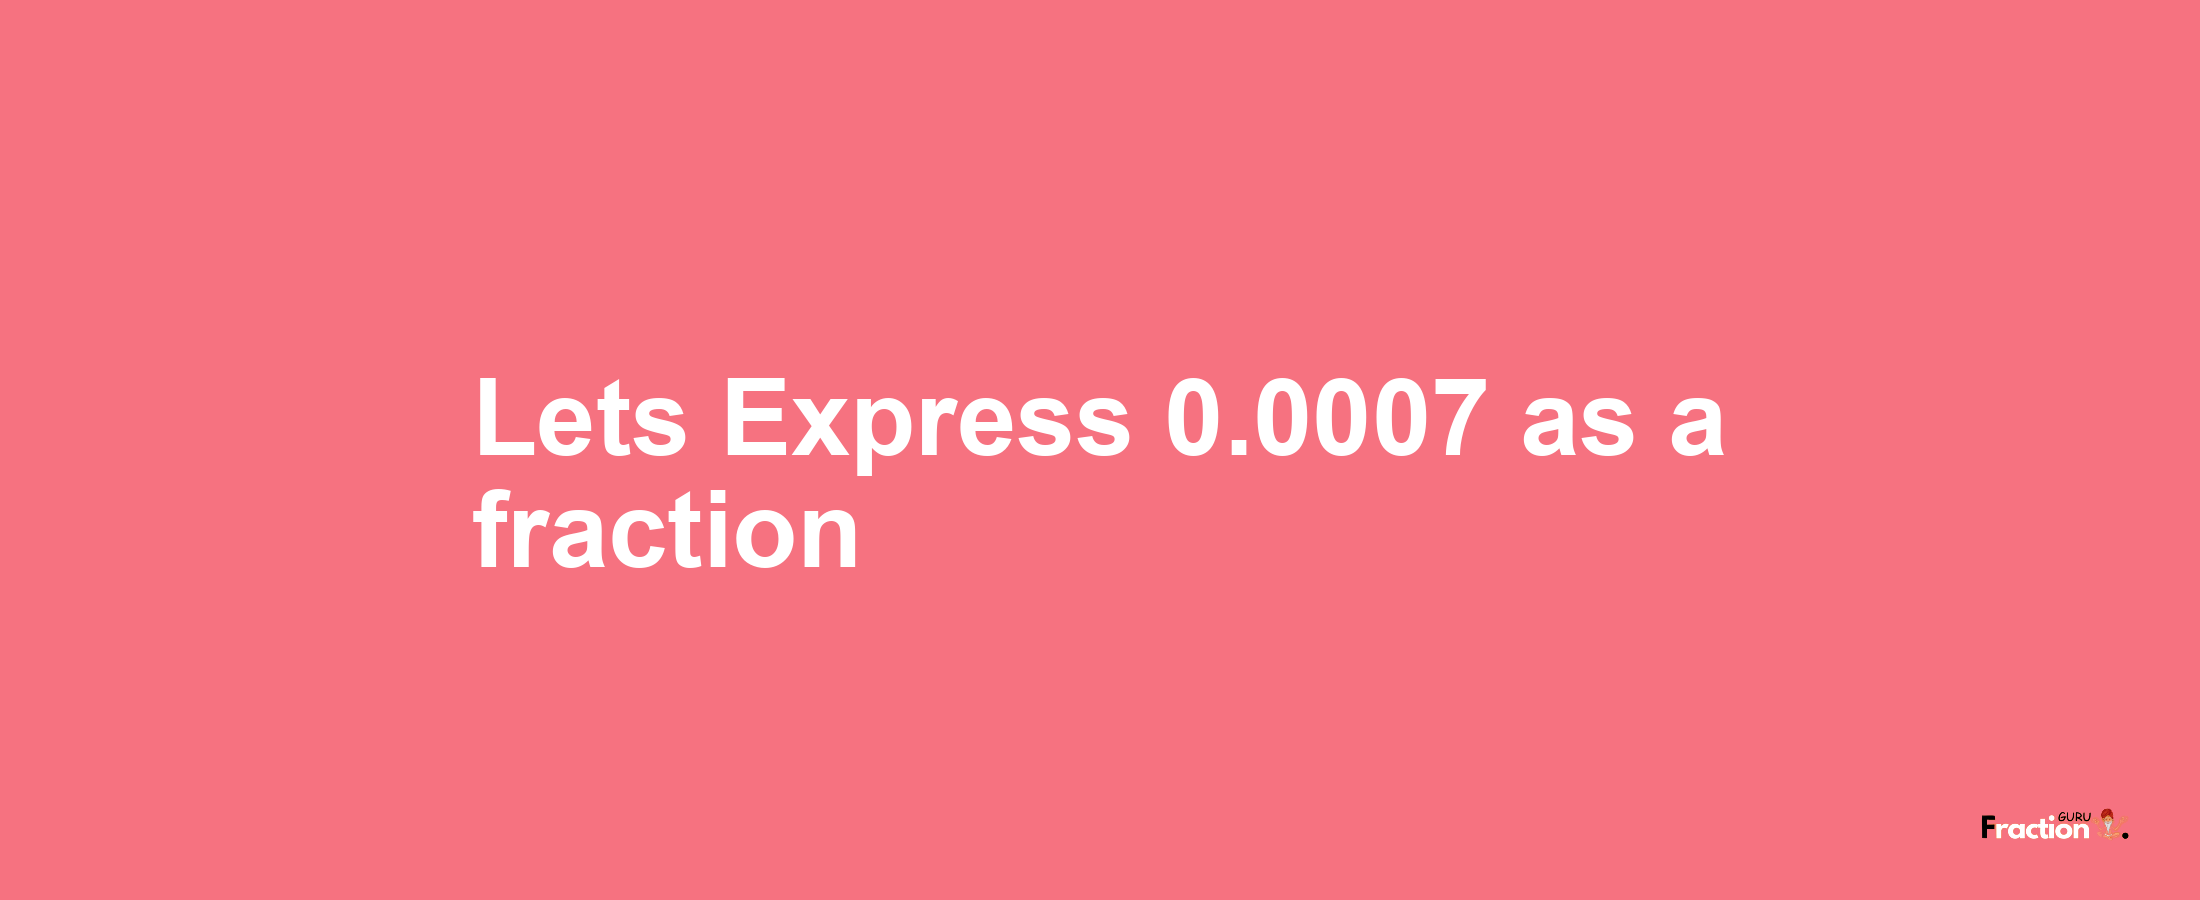 Lets Express 0.0007 as afraction